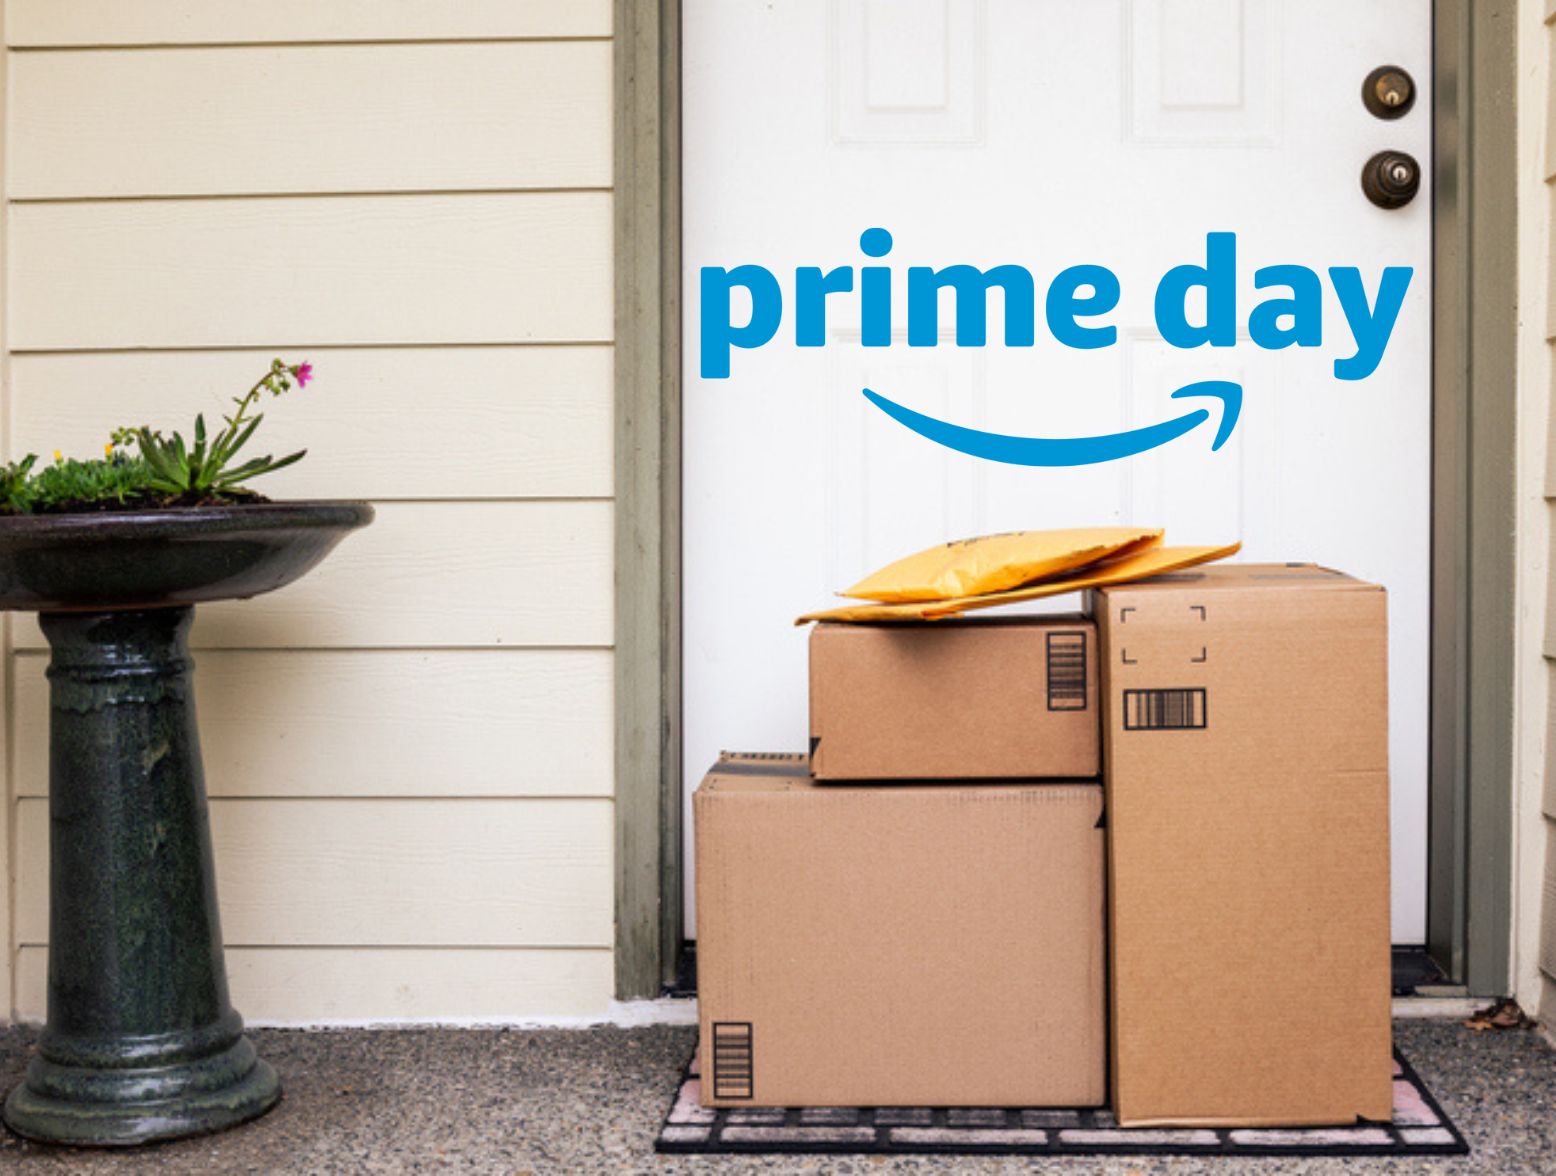 Best Deals on Amazon Prime Day